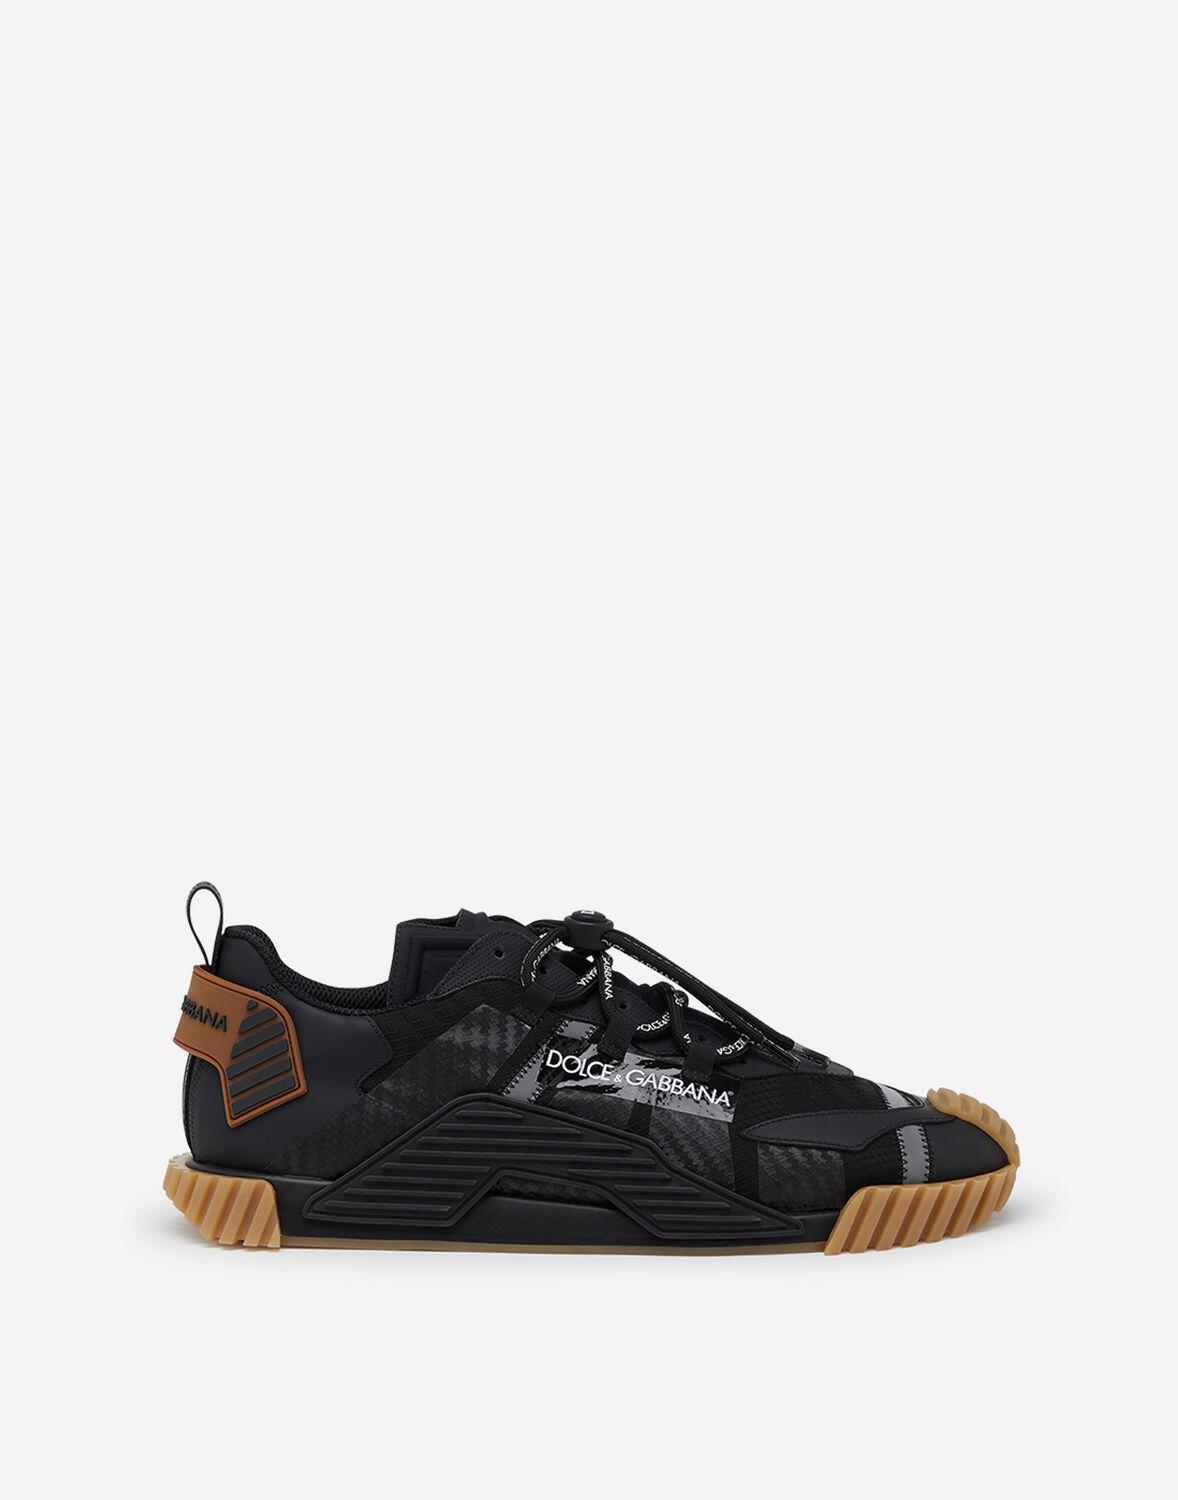 Dolce & Gabbana Suede Ns1 Sneakers In Mixed Materials in Black for Men ...